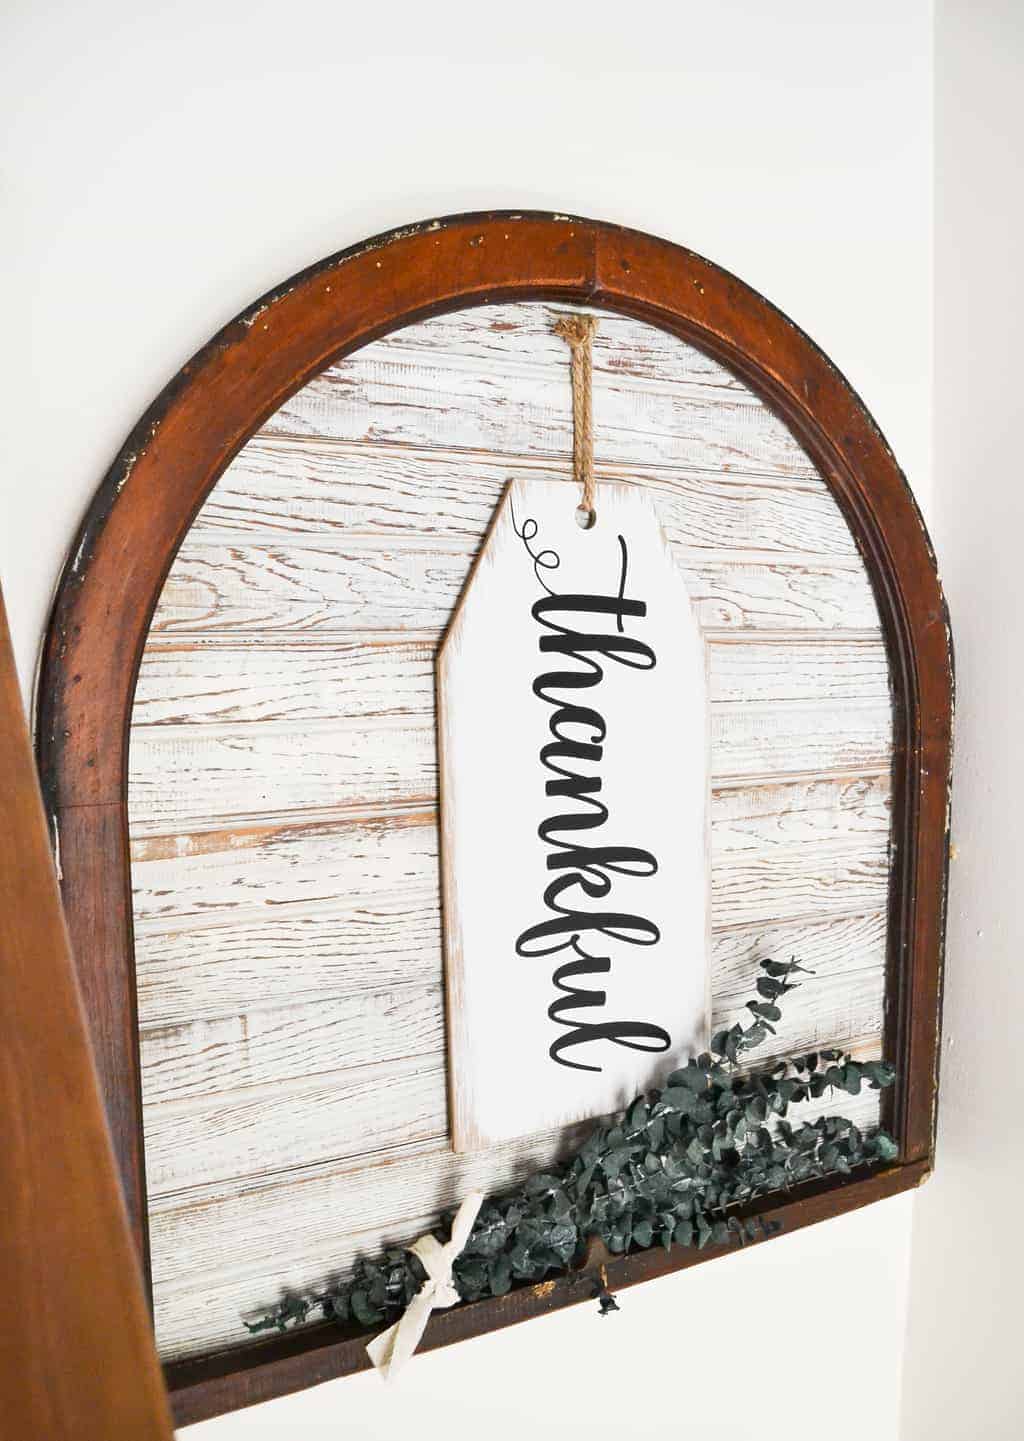 Wooden Arched Window with Lovely Message